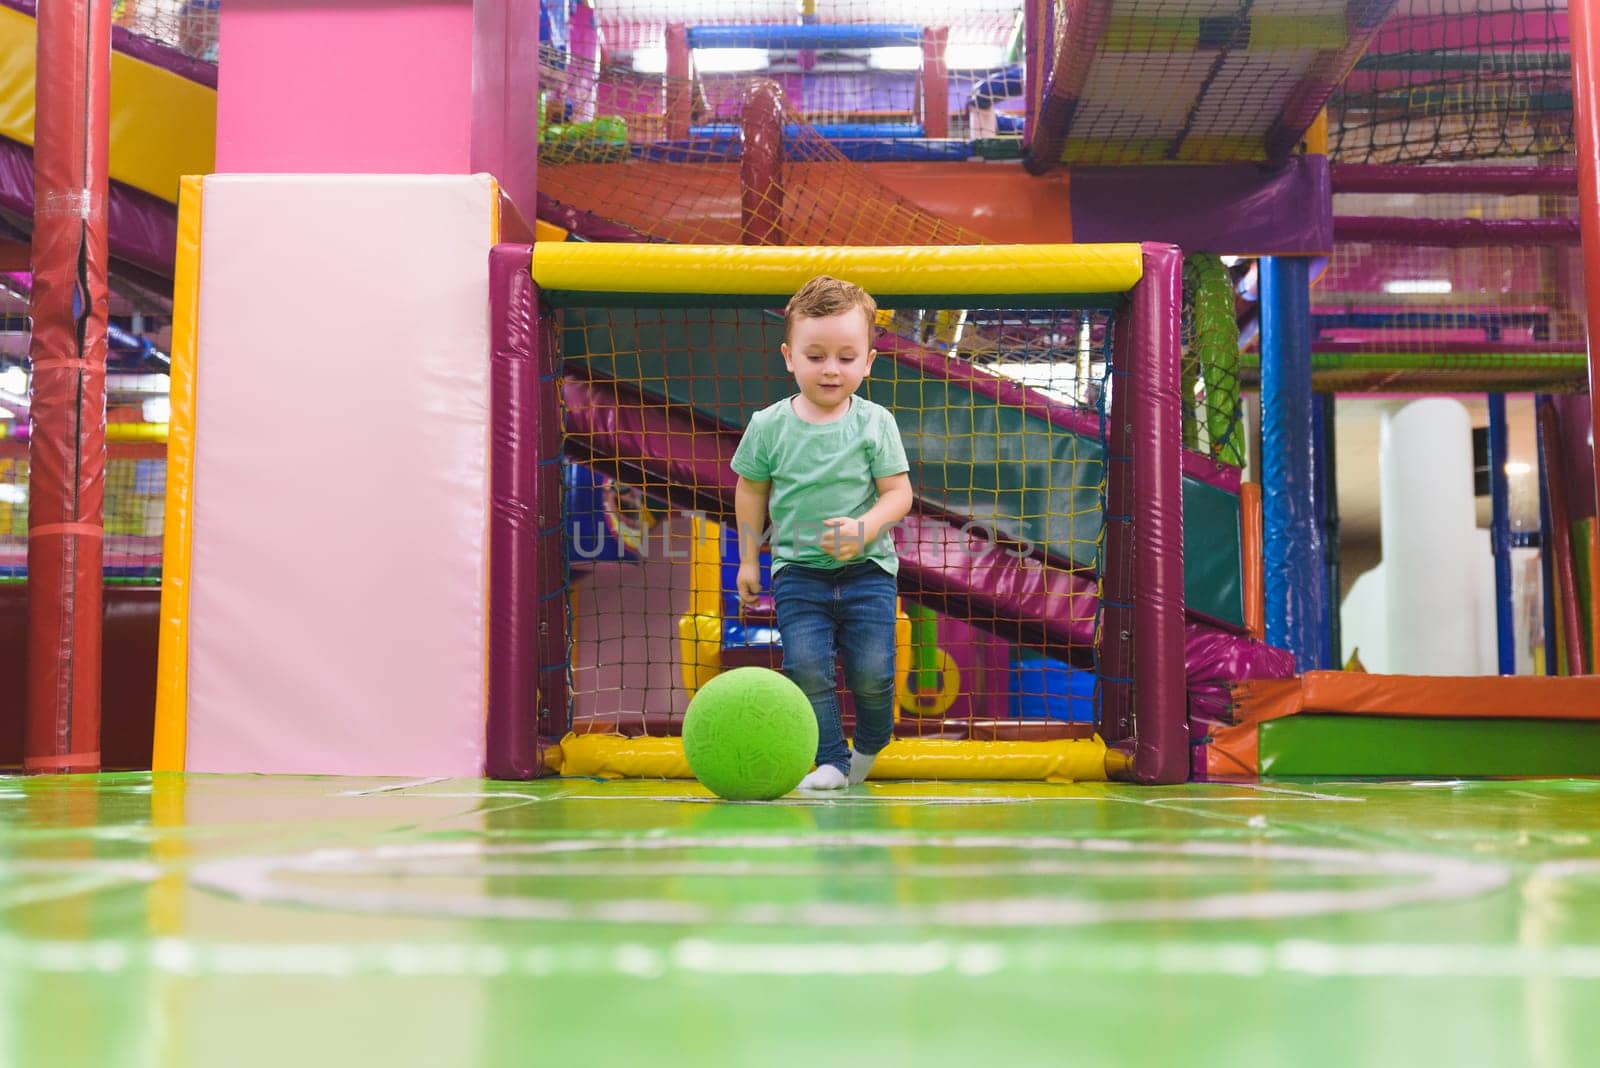 indoor playground with colored games.